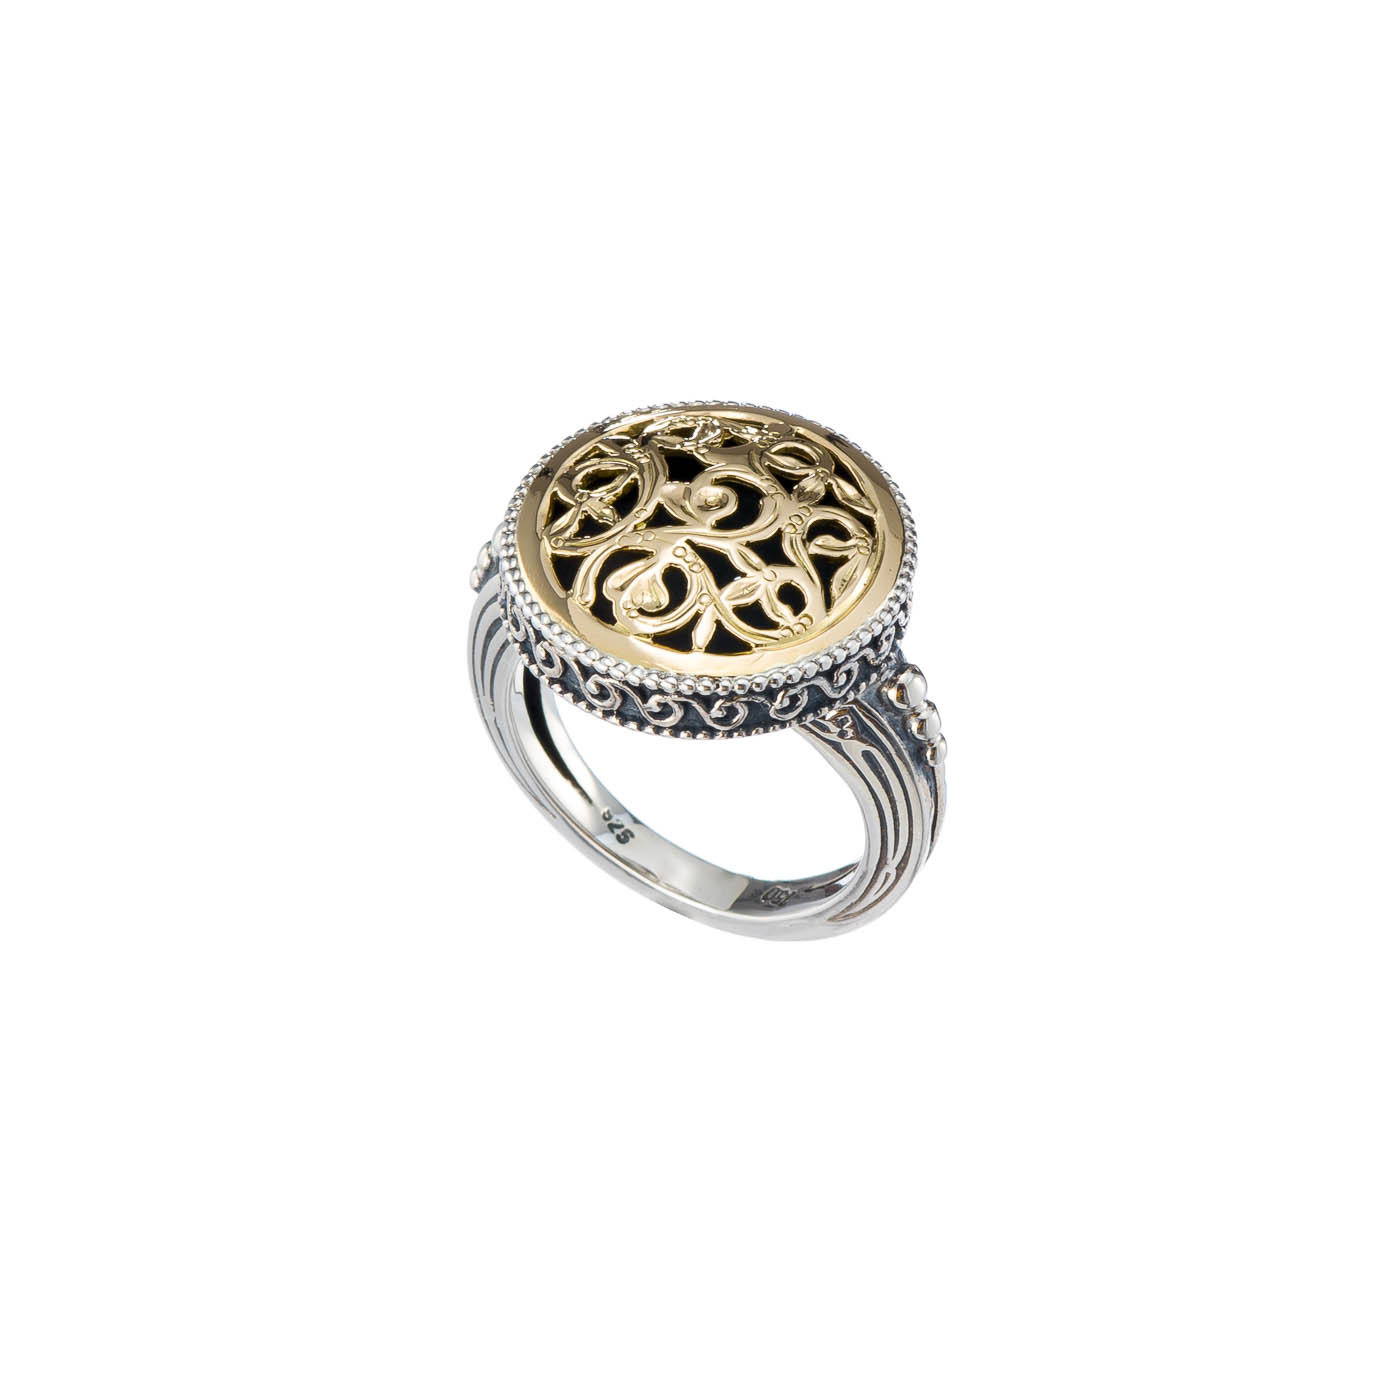 Garden shadows round ring in 18K Gold and Sterling Silver